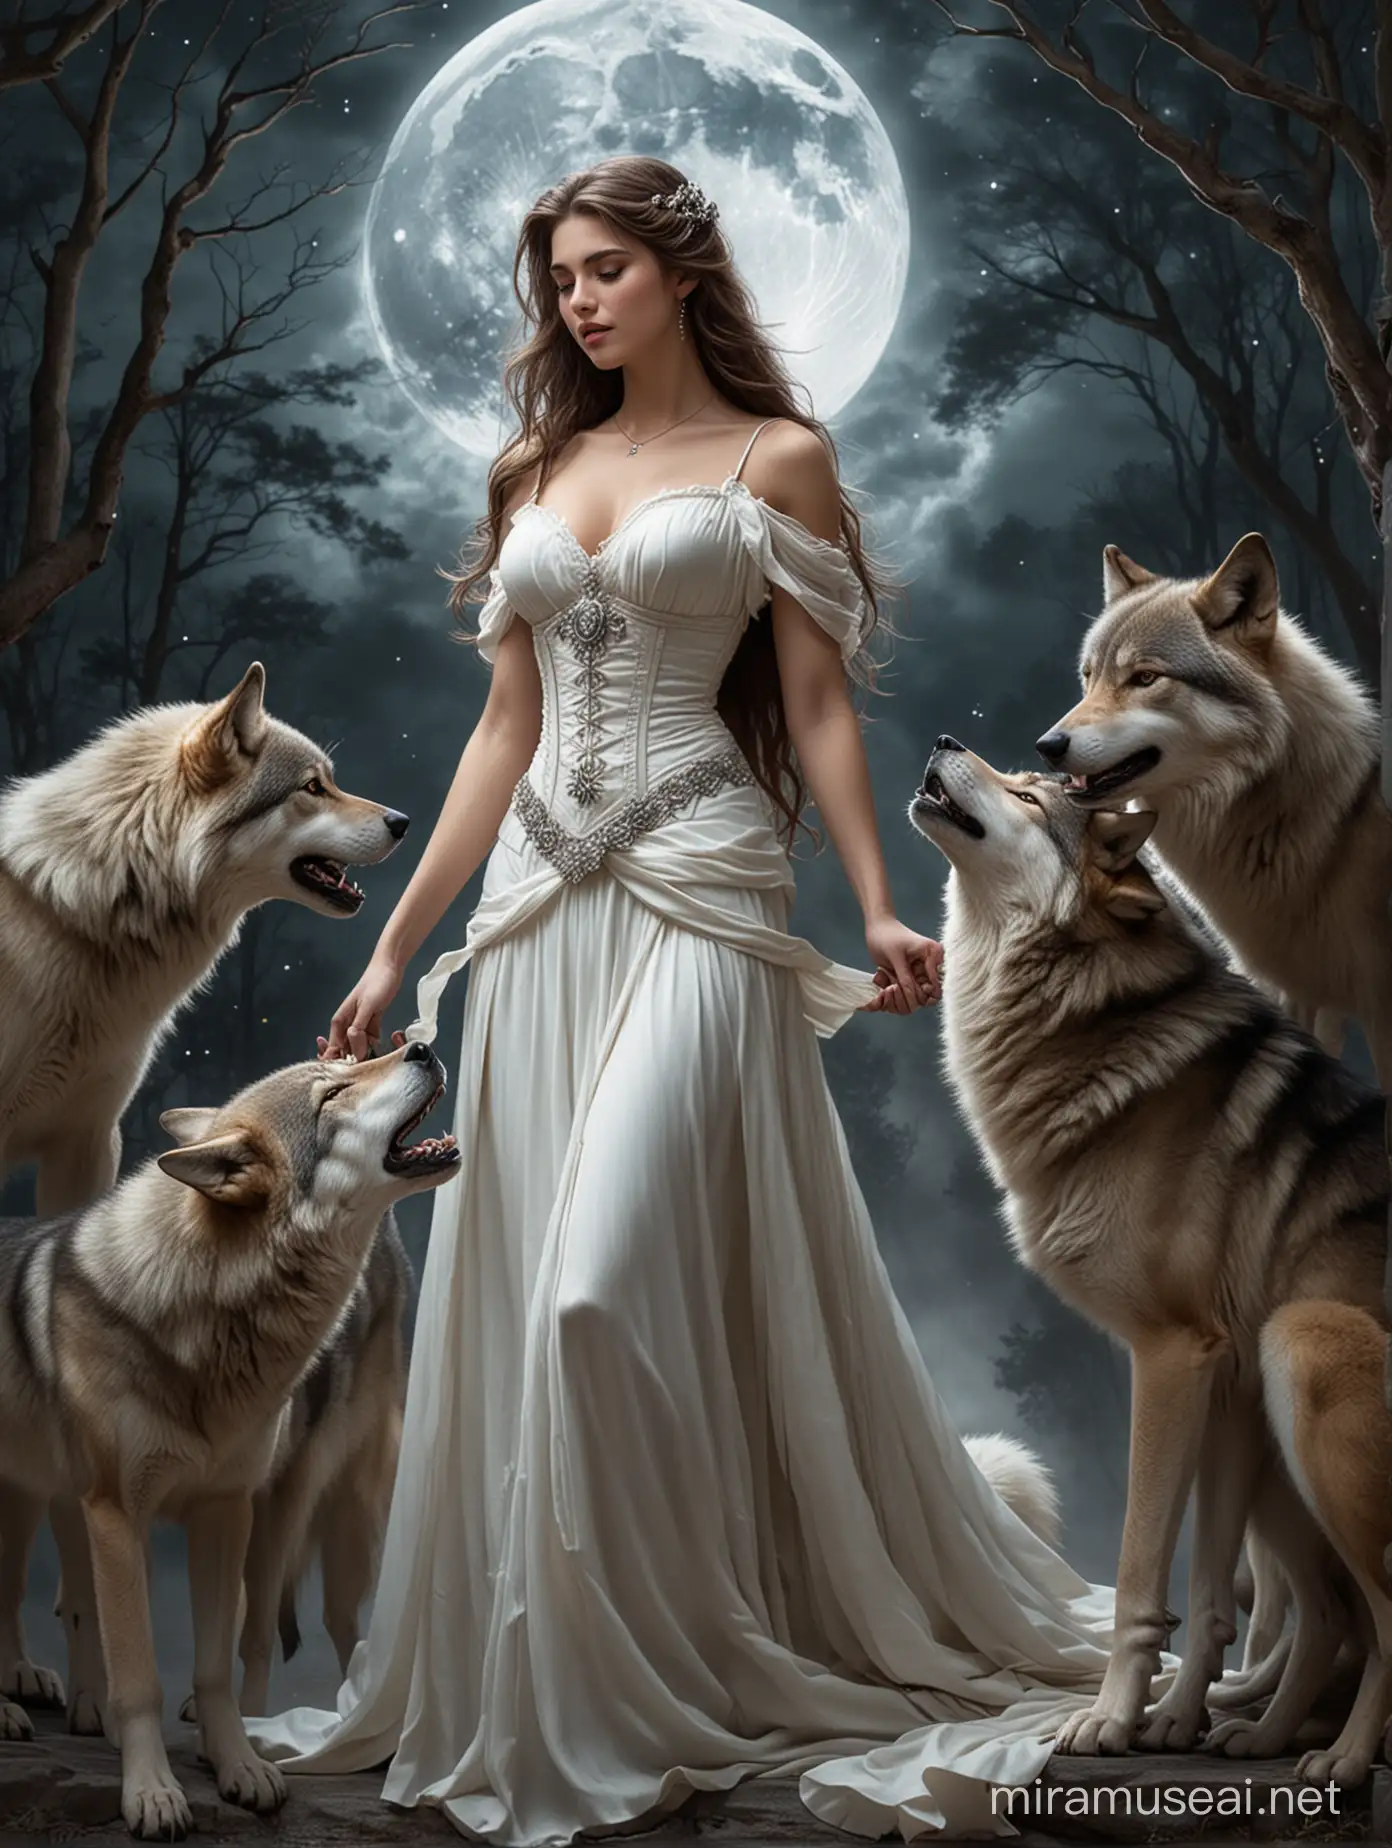 Romantic Couple Embraced by Wolves Under Moonlight